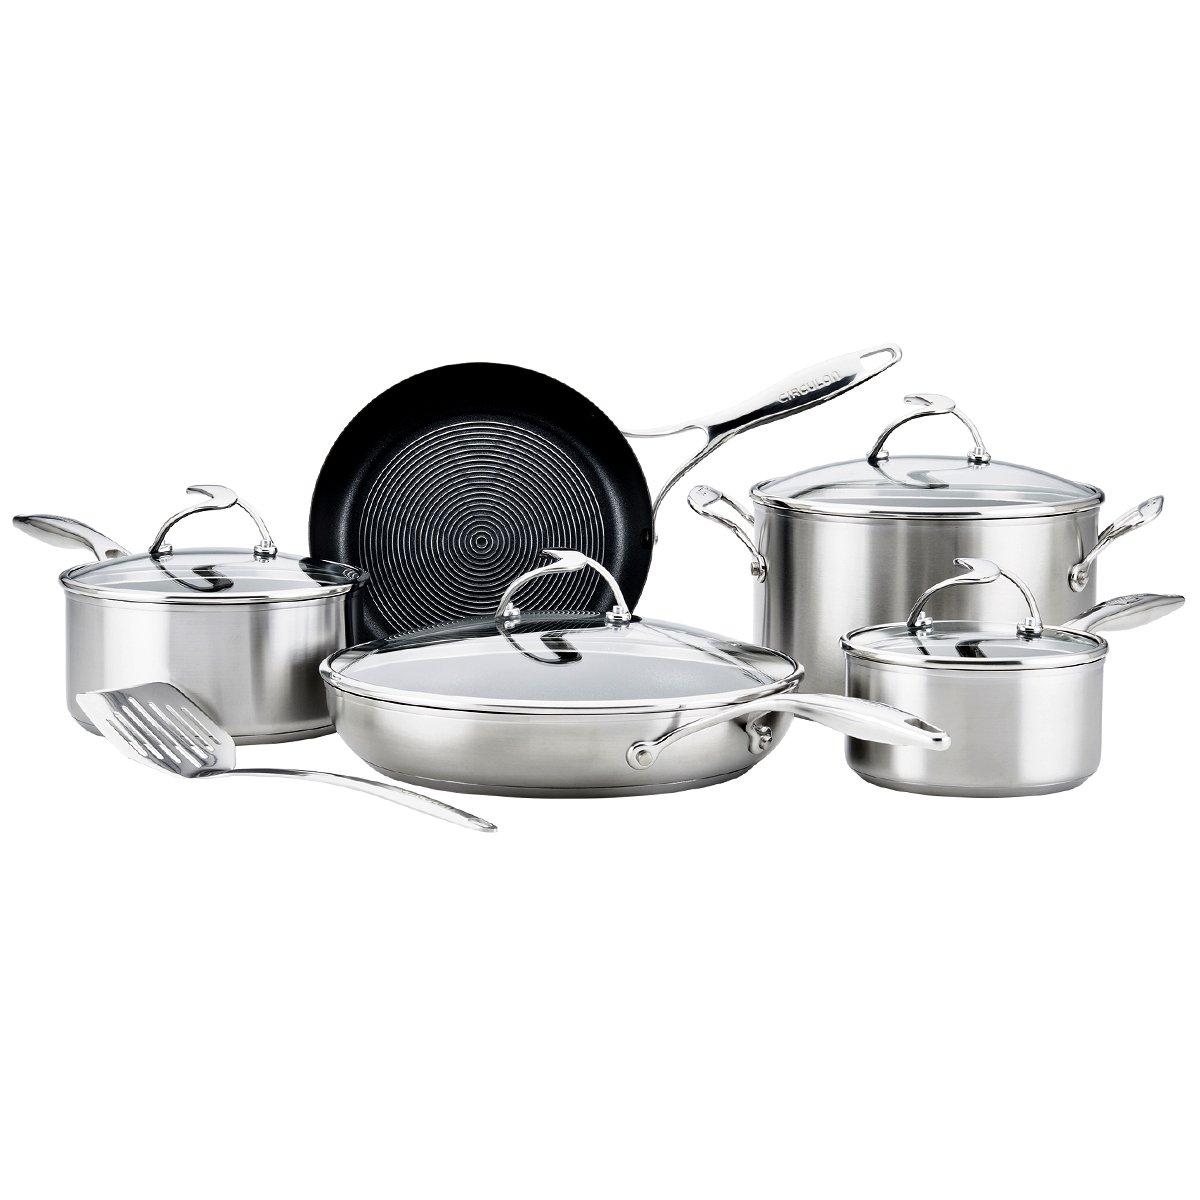 S Series' Non Stick Cookware Set with Slotted Turner - Pack of 5